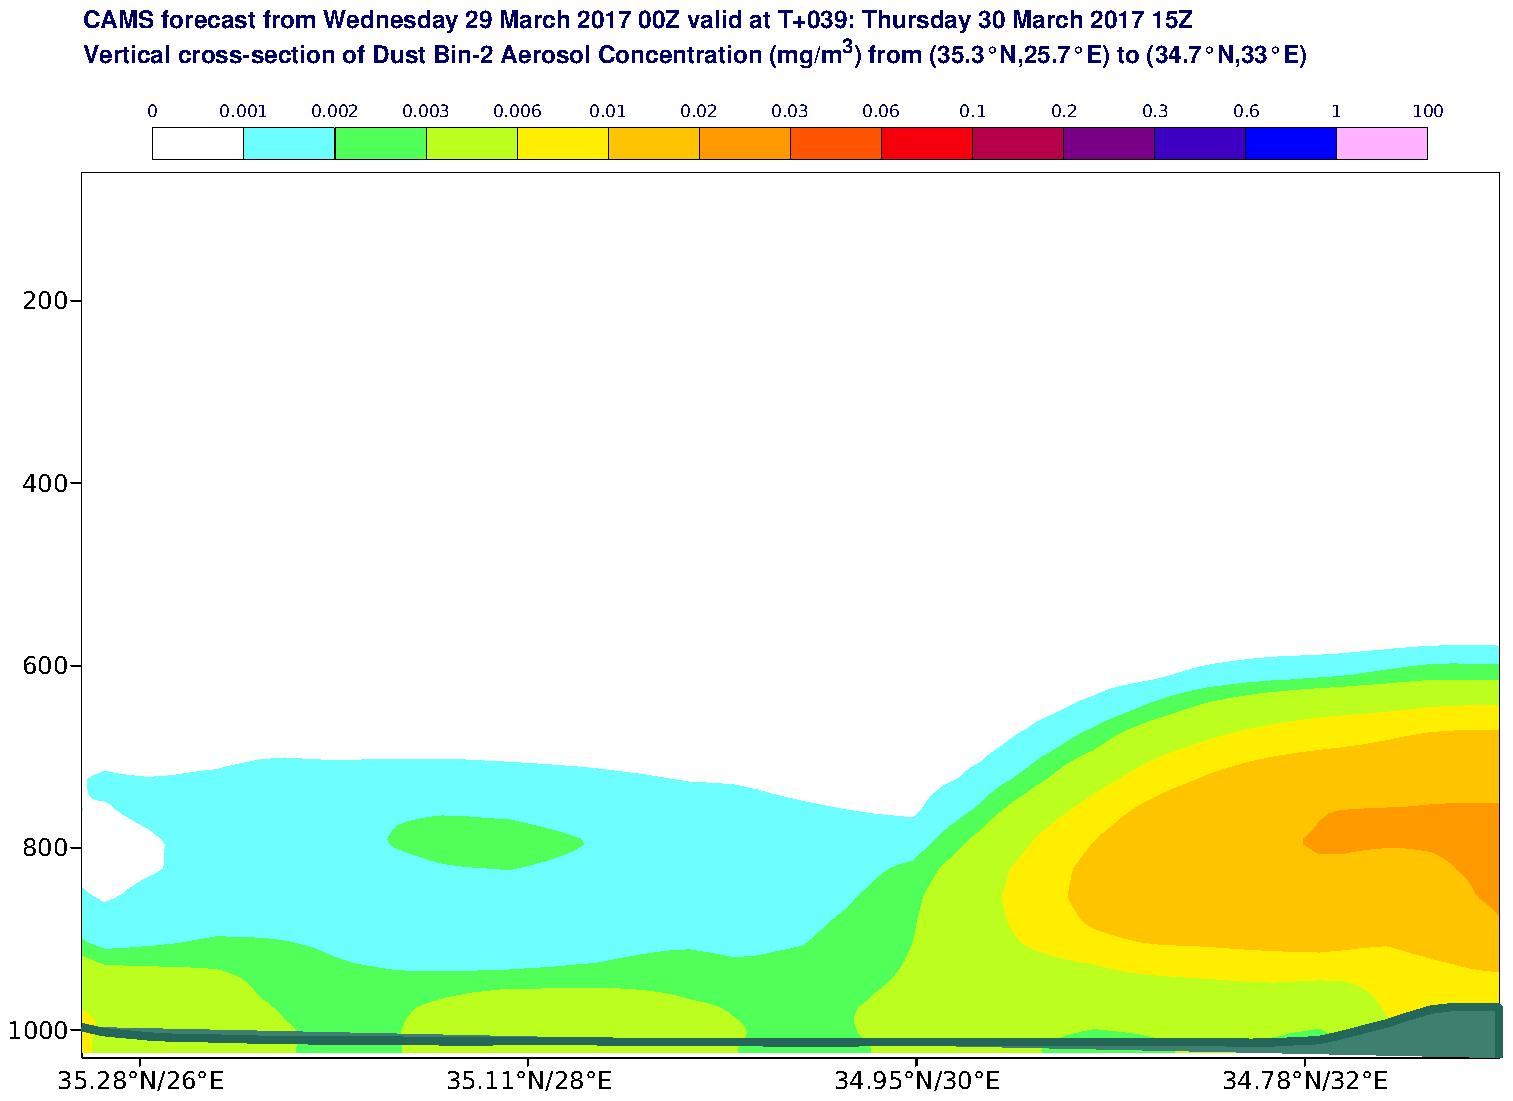 Vertical cross-section of Dust Bin-2 Aerosol Concentration (mg/m3) valid at T39 - 2017-03-30 15:00